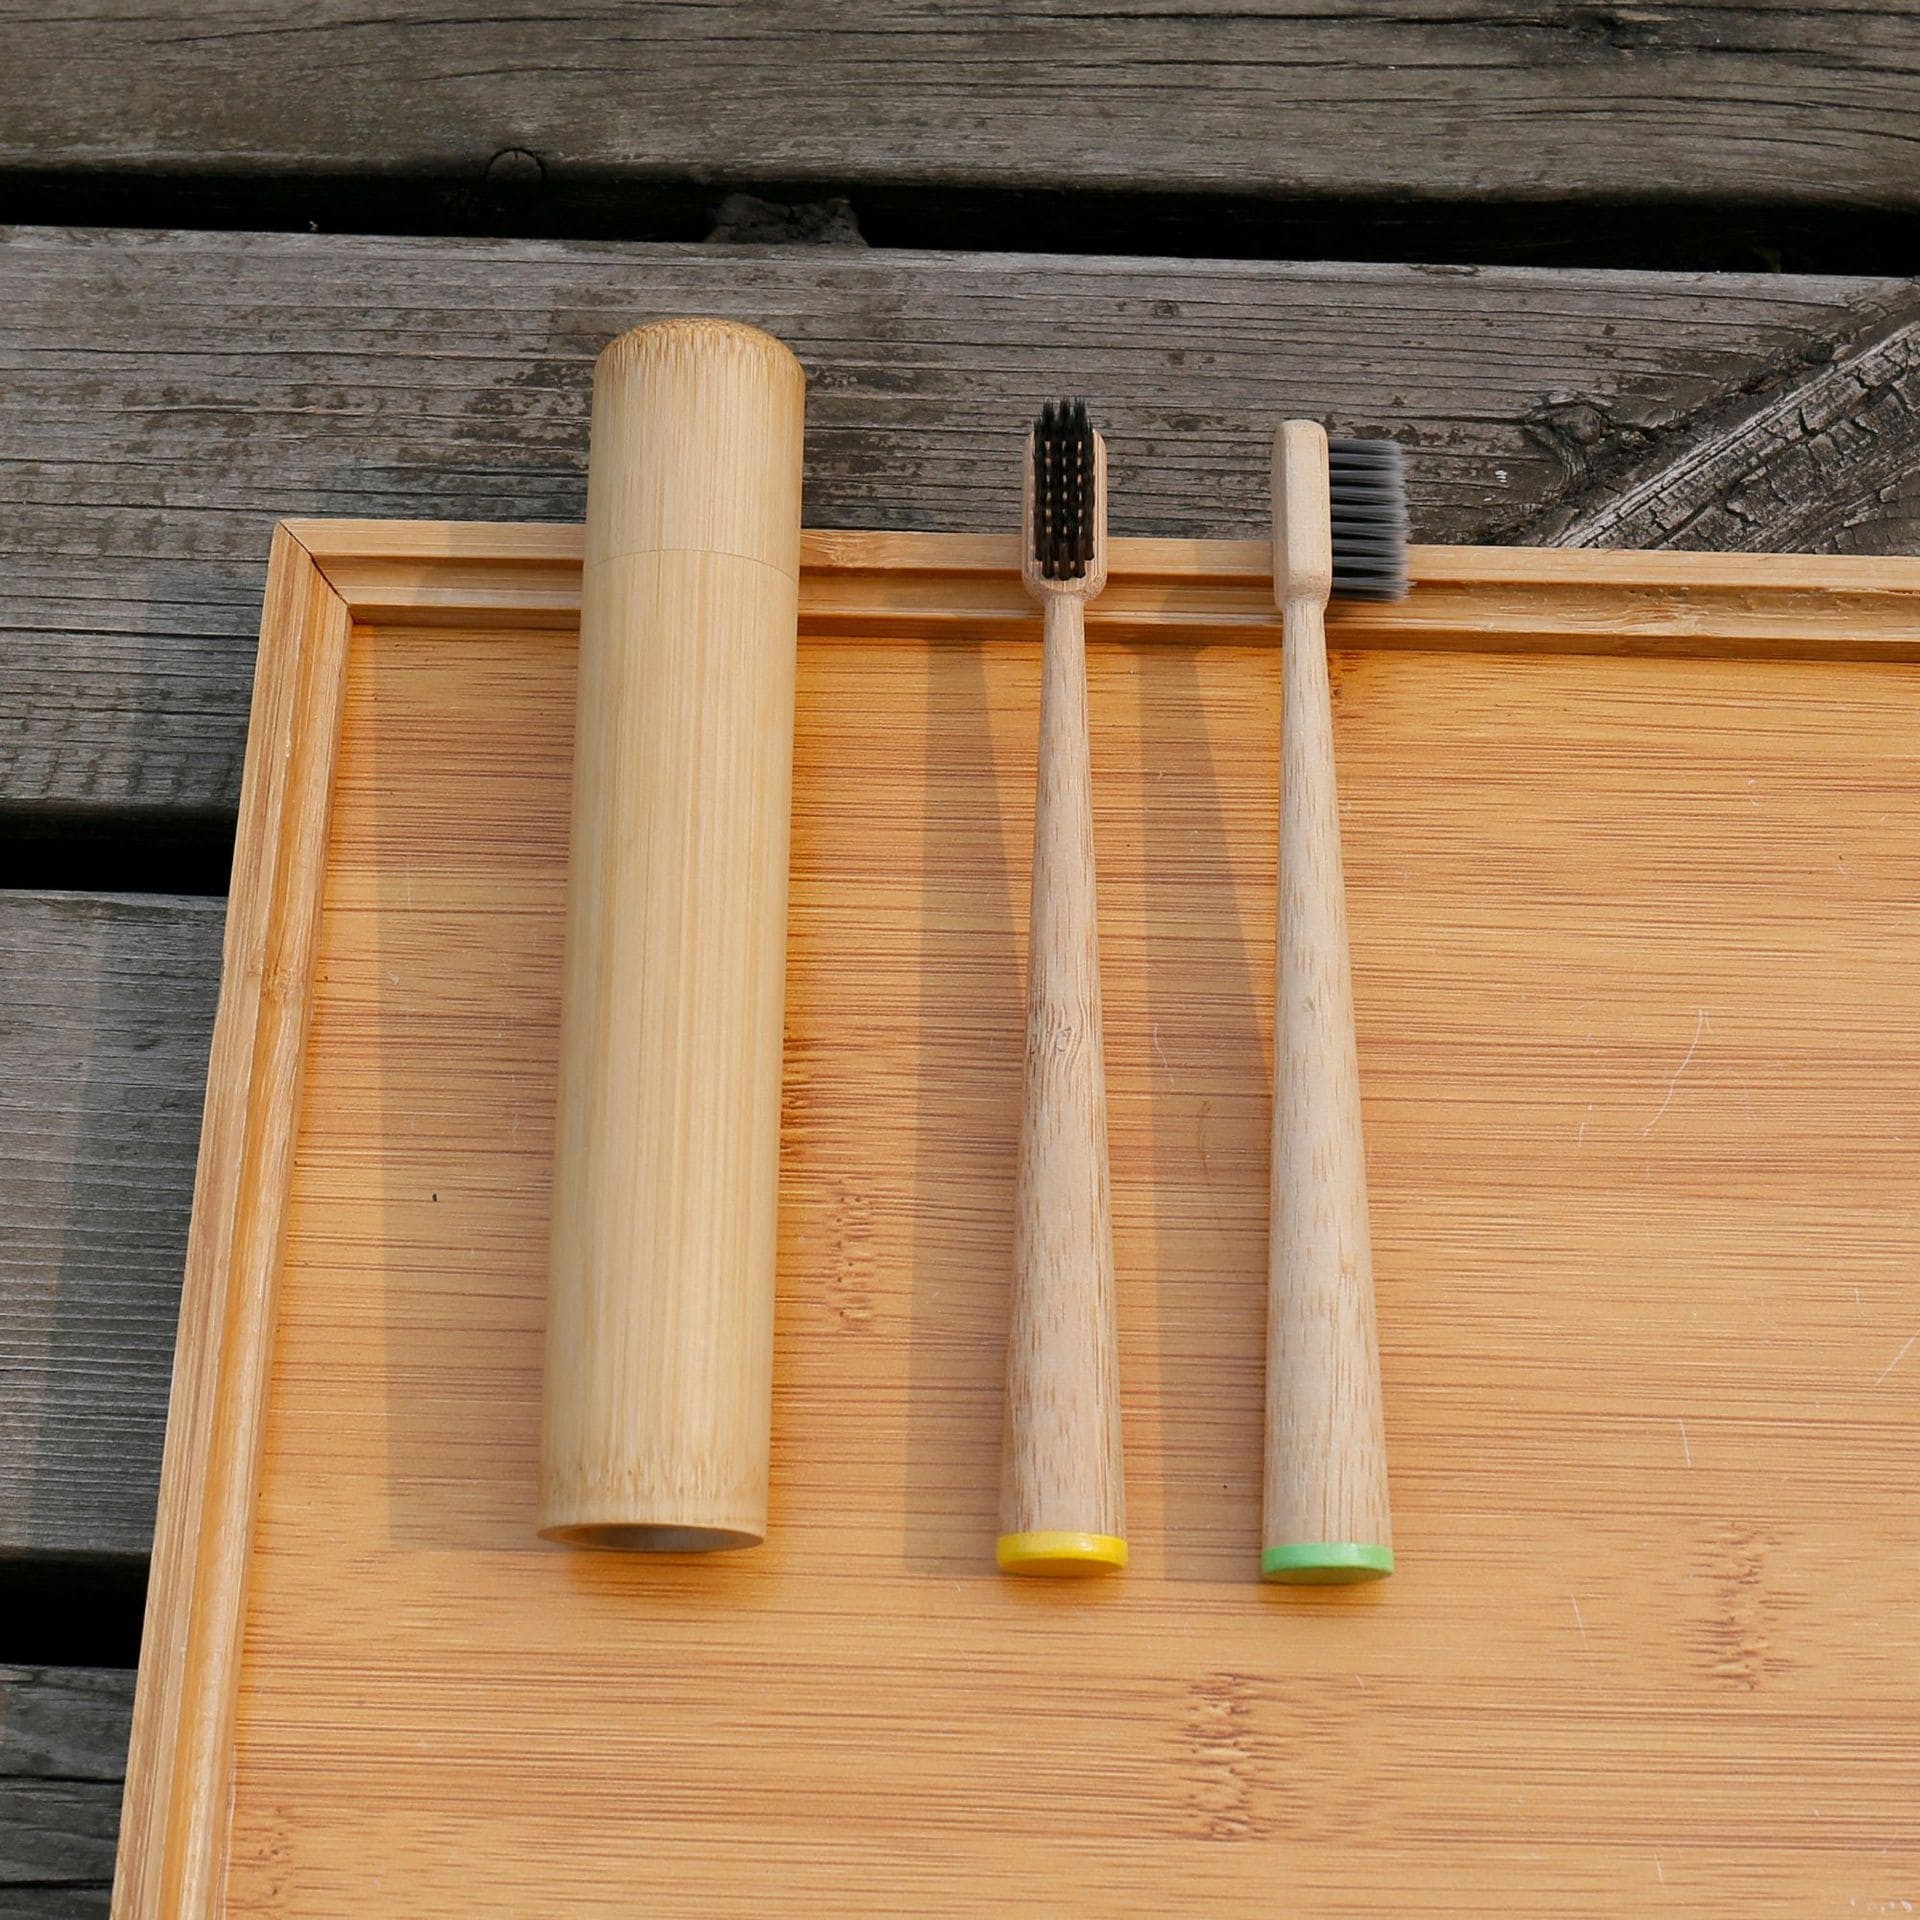 3 Reasons Why Bamboo Toothbrushes Are the Trend of the Future